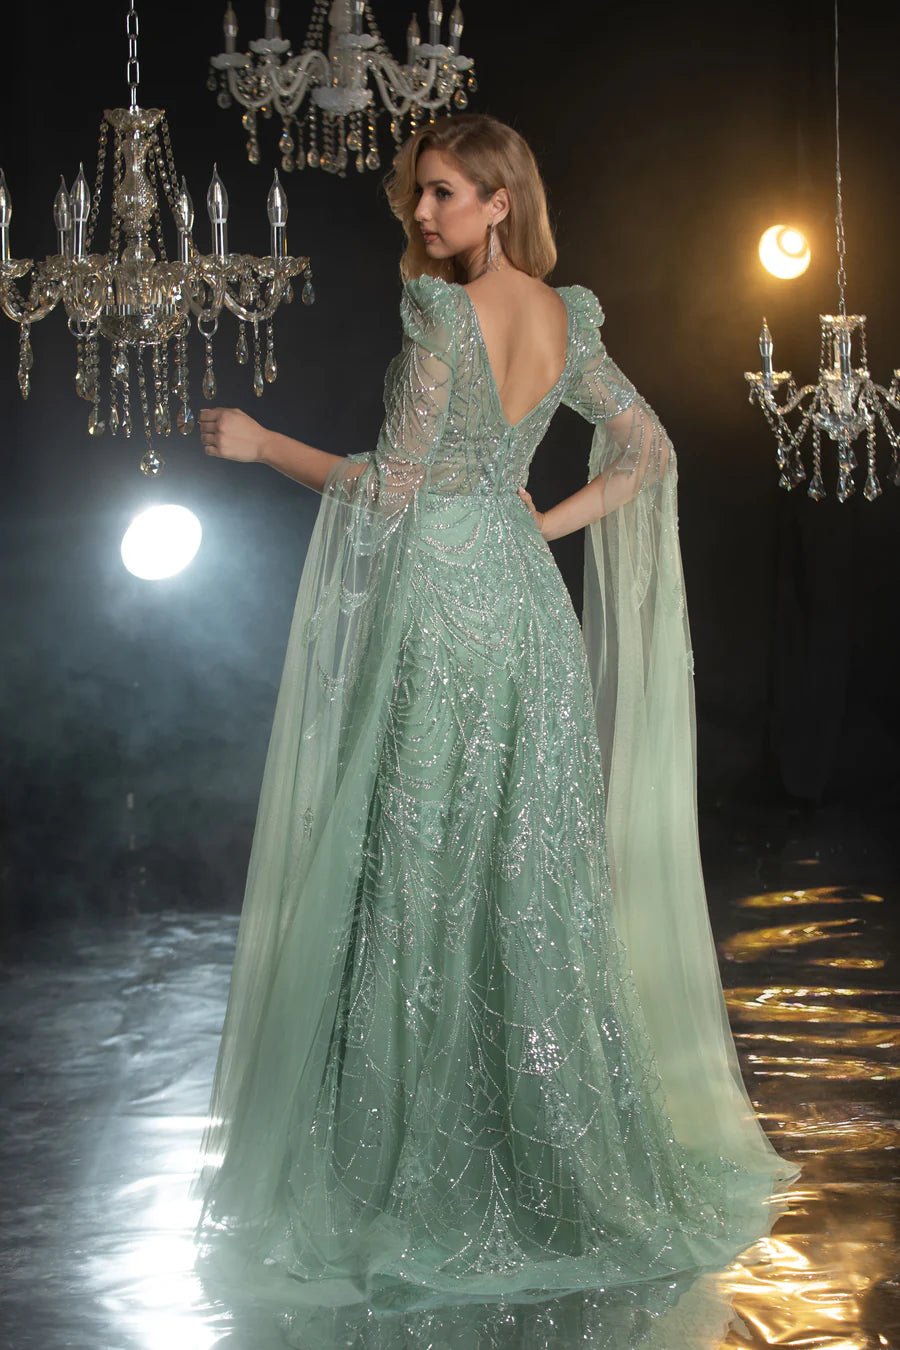 Elegant Mint Green Pretty Sequin Dress with Cape Sleeves - Designer Sequin Gown and Sequin Evening Gown Plus Size - WonderlandByLilian